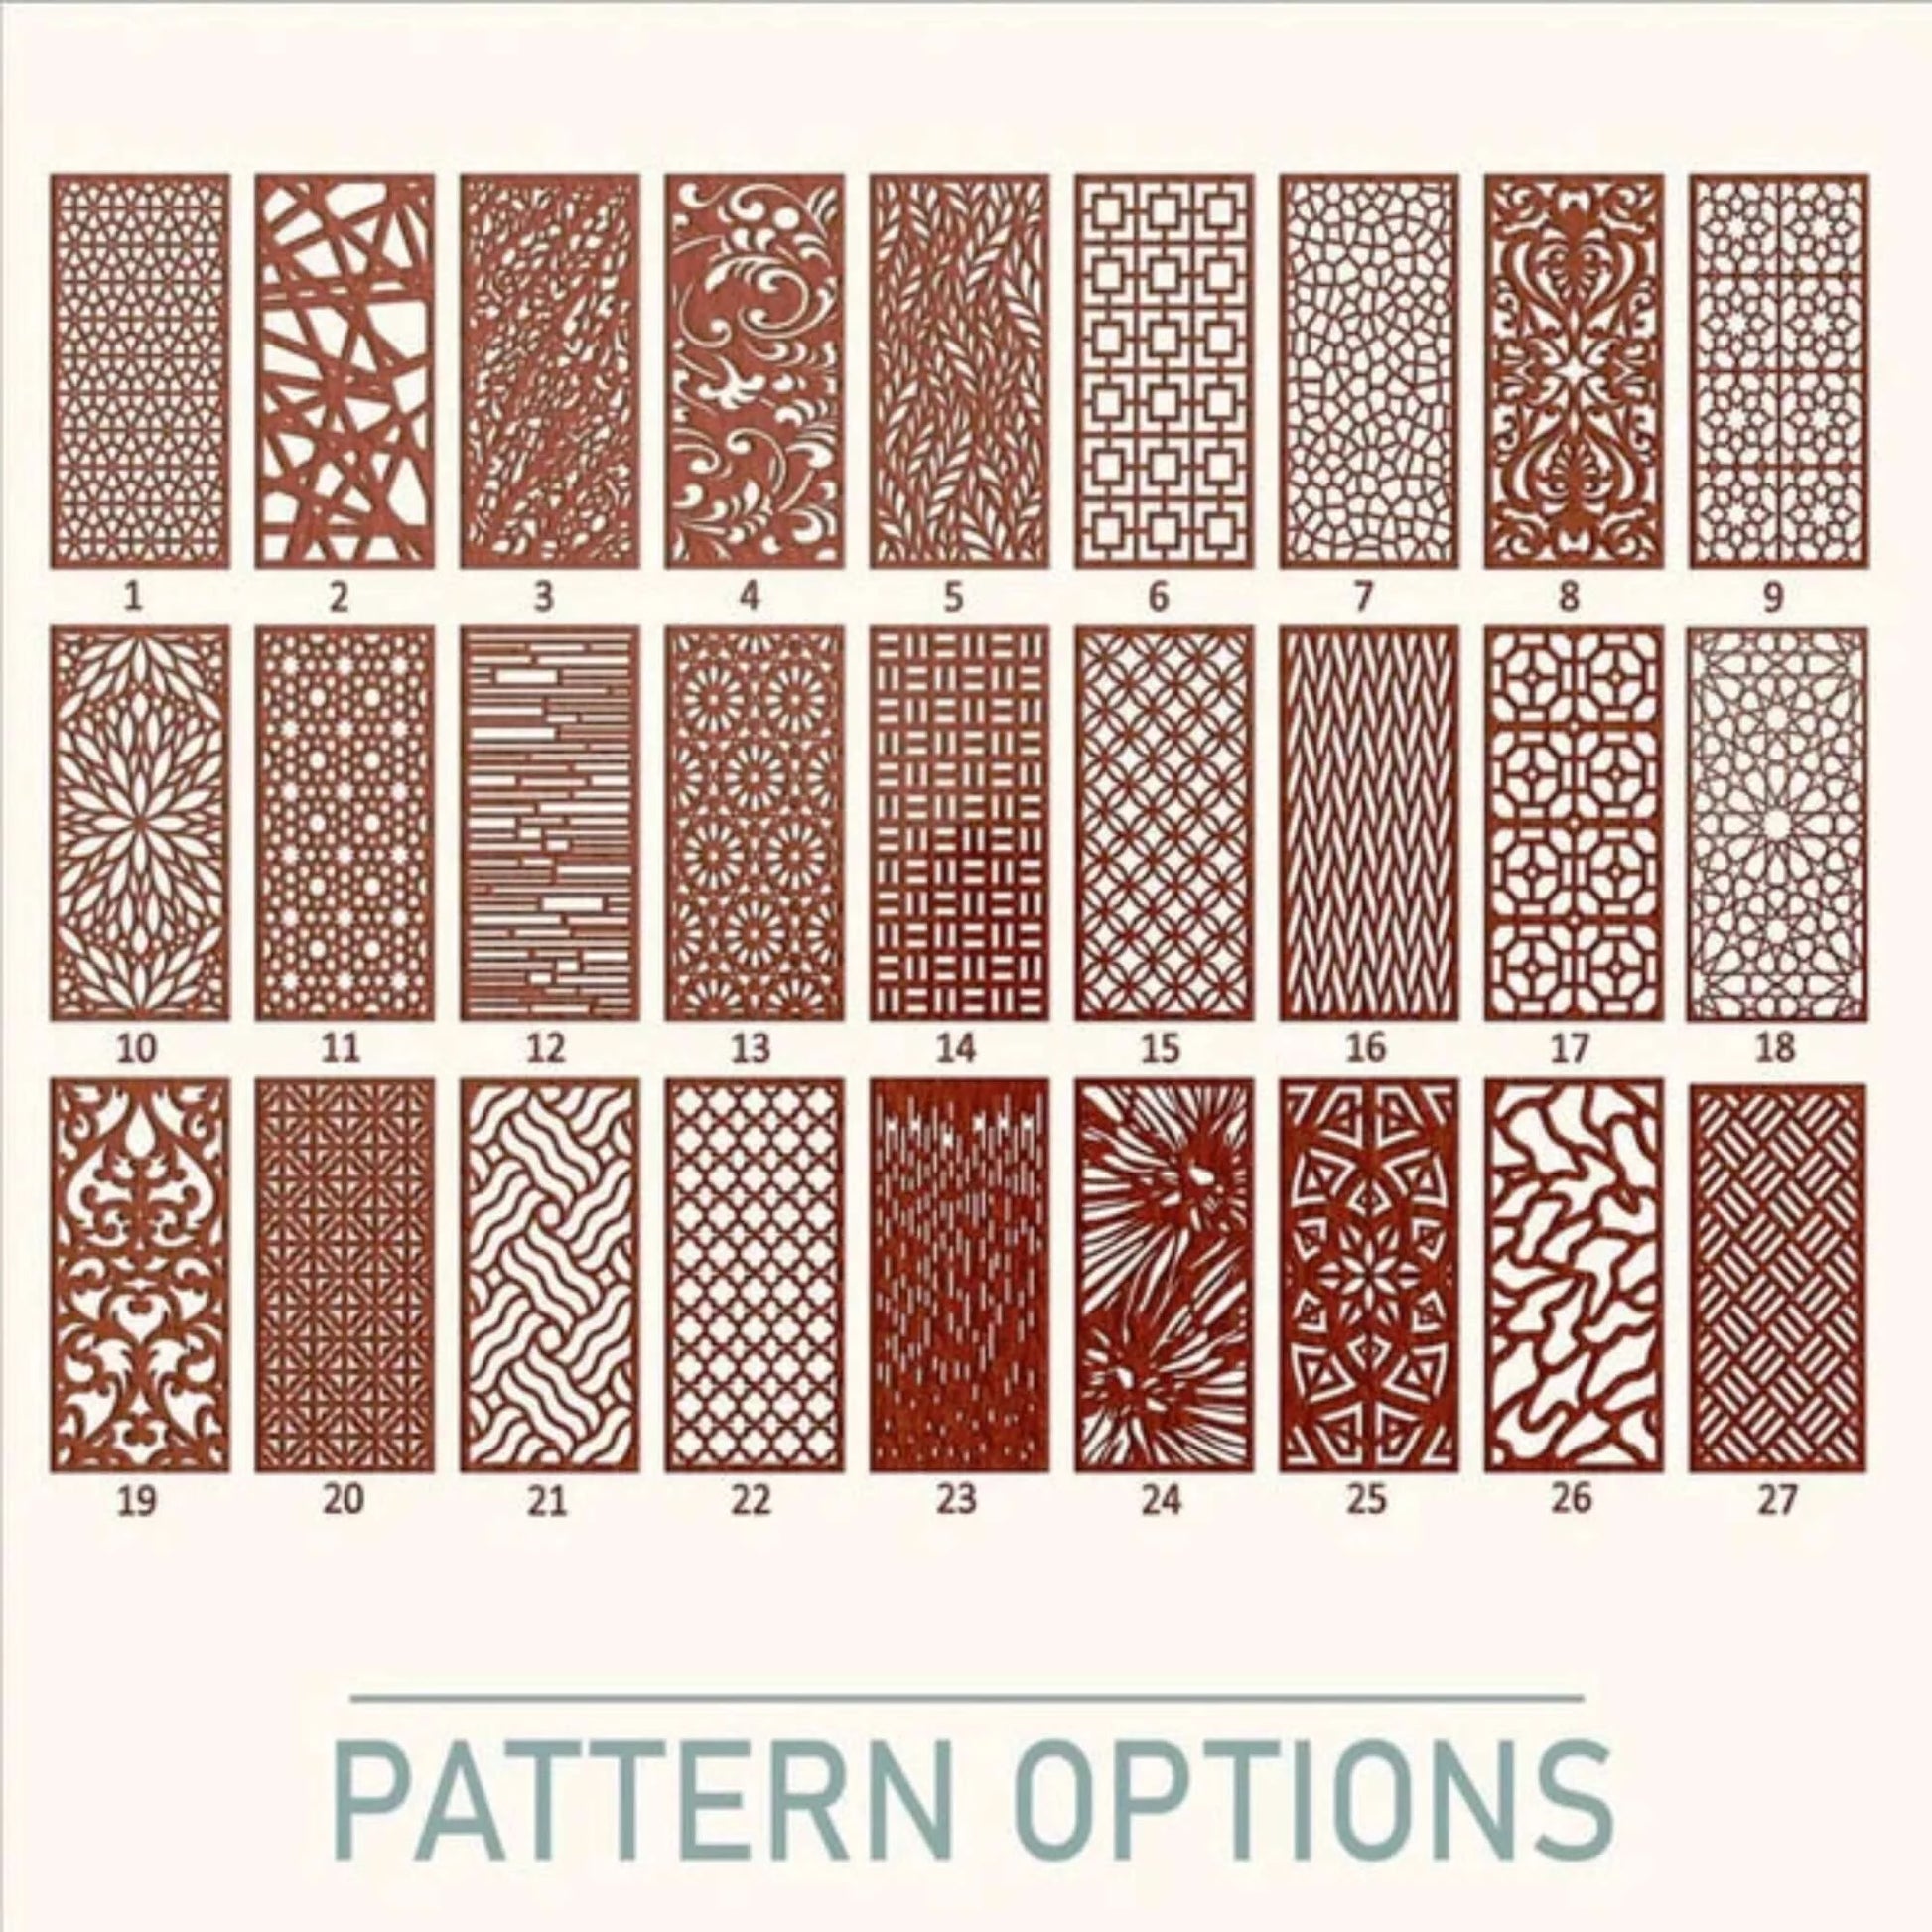 Partition, Room Divider, Custom Divider Screen, Panels, Privacy Screen, Room Divider, Custom Panels, Free Standing Panels, Decorative room divider, Privacy partitions, Paravent, Mihrab, Islamic panels, Mosque partition, Mosque separator, custom panel, room divider, room dividers, craftivaart, Arc panel, Islamic divider, Islamic design, Masjid divider, mosque panel, Islamic room divider, Arc divider design, arc panel, yoga, meditation, Islamic design